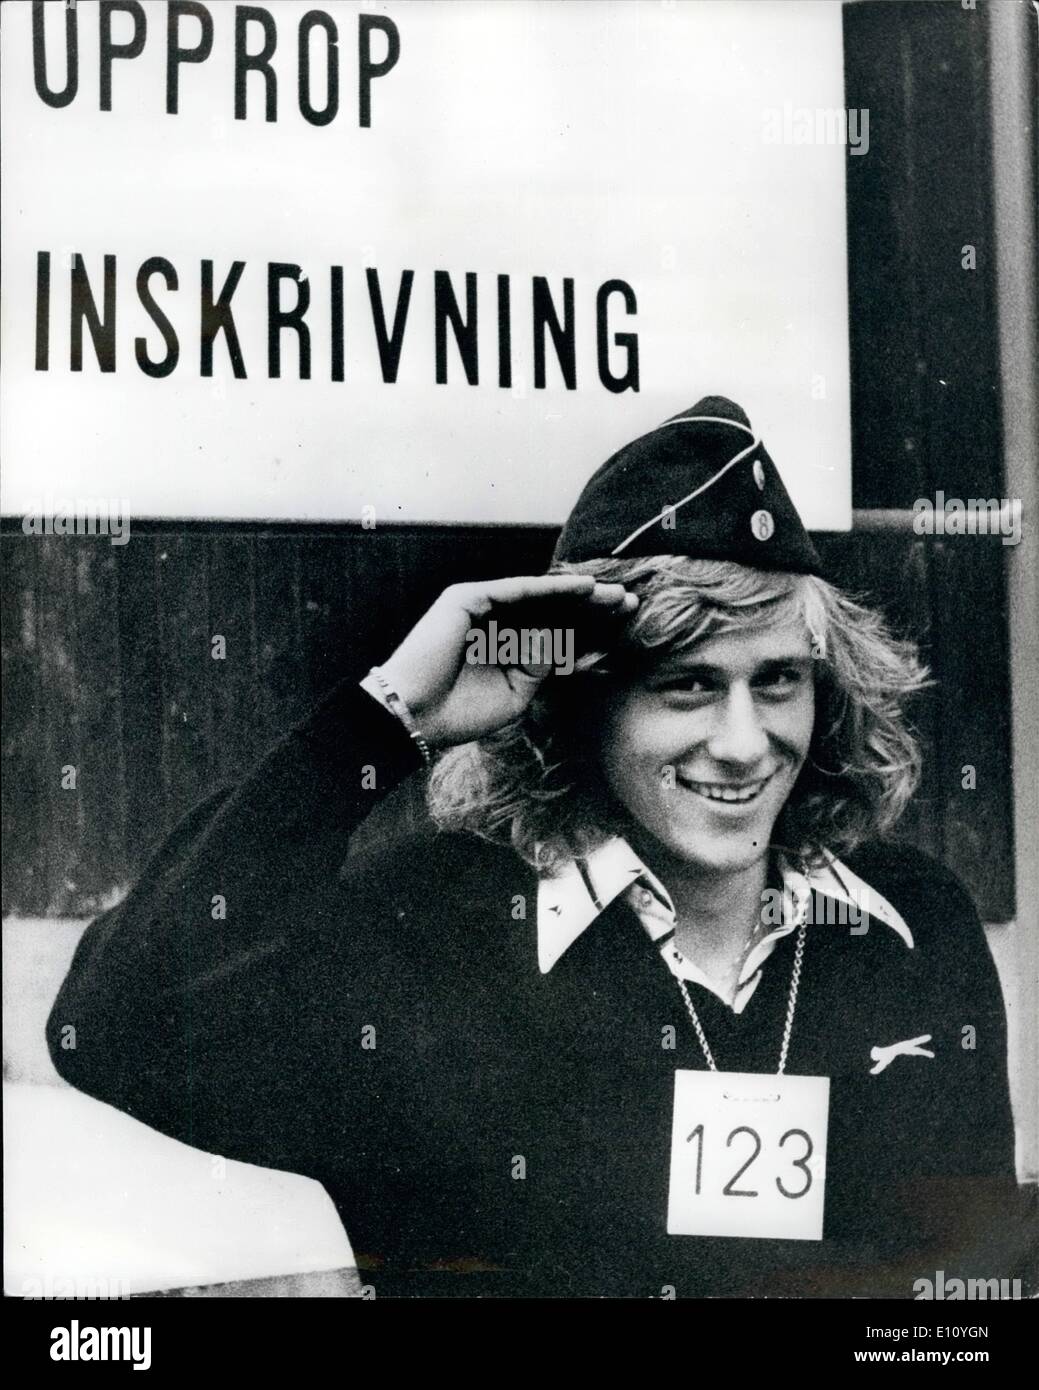 Oct. 10, 1974 - Bjorn Borg reports at Army National Service Centre.: Like other Swedish 18-year old, Bjorn Borg, the young golden boy of tennis, this week reported to an Army national service centre in Stockholm, where he completed medical and aptitude tests. Because he spends more than six months abroad each year it is unlikely that he will be called up. Photo shows Bjorn Borg gives a smart salute at the centre in Stockholm. Stock Photo